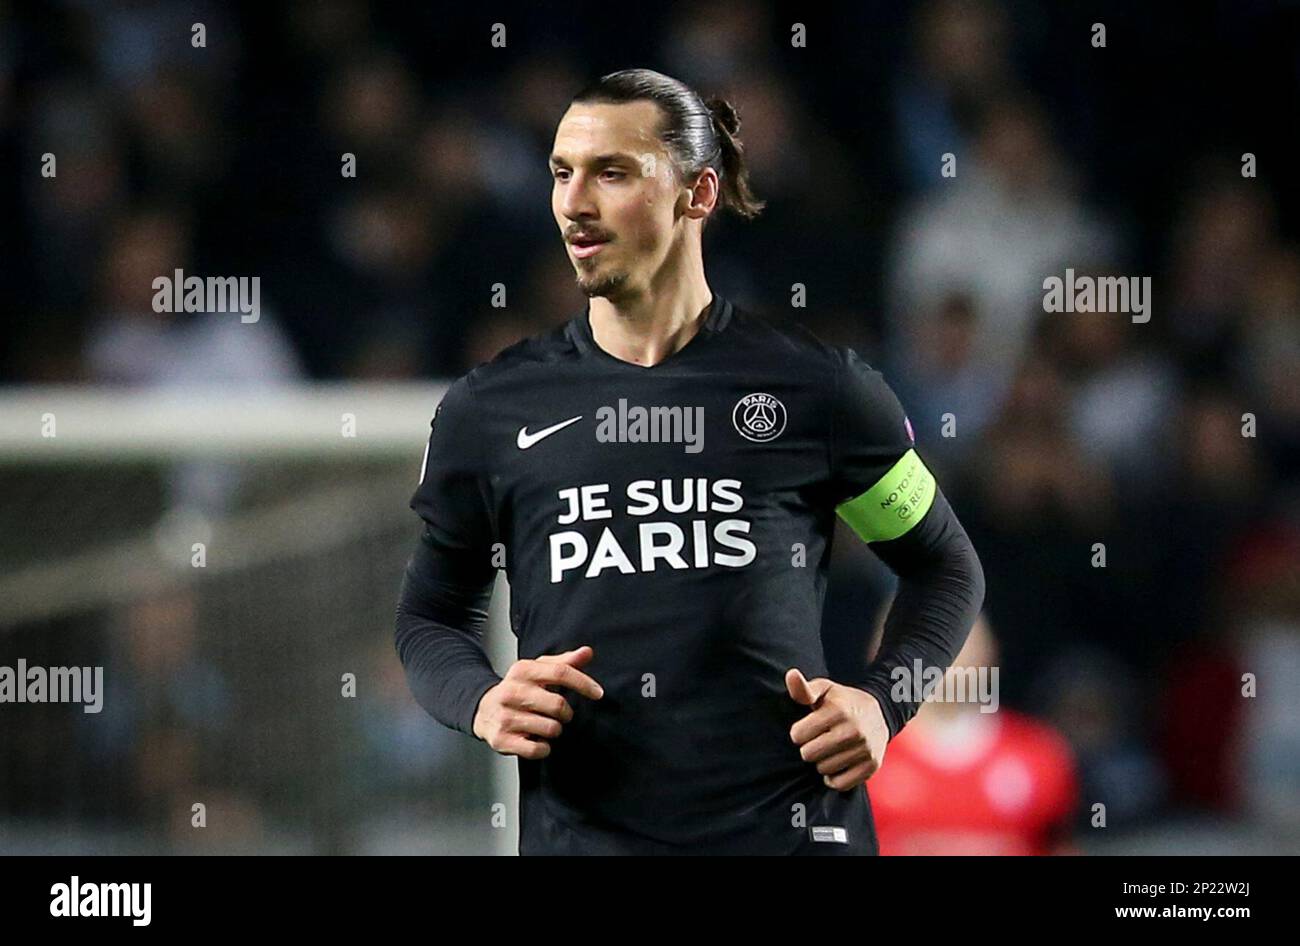 Paris SG's Zlatan Ibrahimovic wears the Je Suis Paris jersey during the  Champions League Group A soccer match between Malmo FF and Paris  Saint-Germain FC at Malmo New Stadium in Malmo, Sweden,